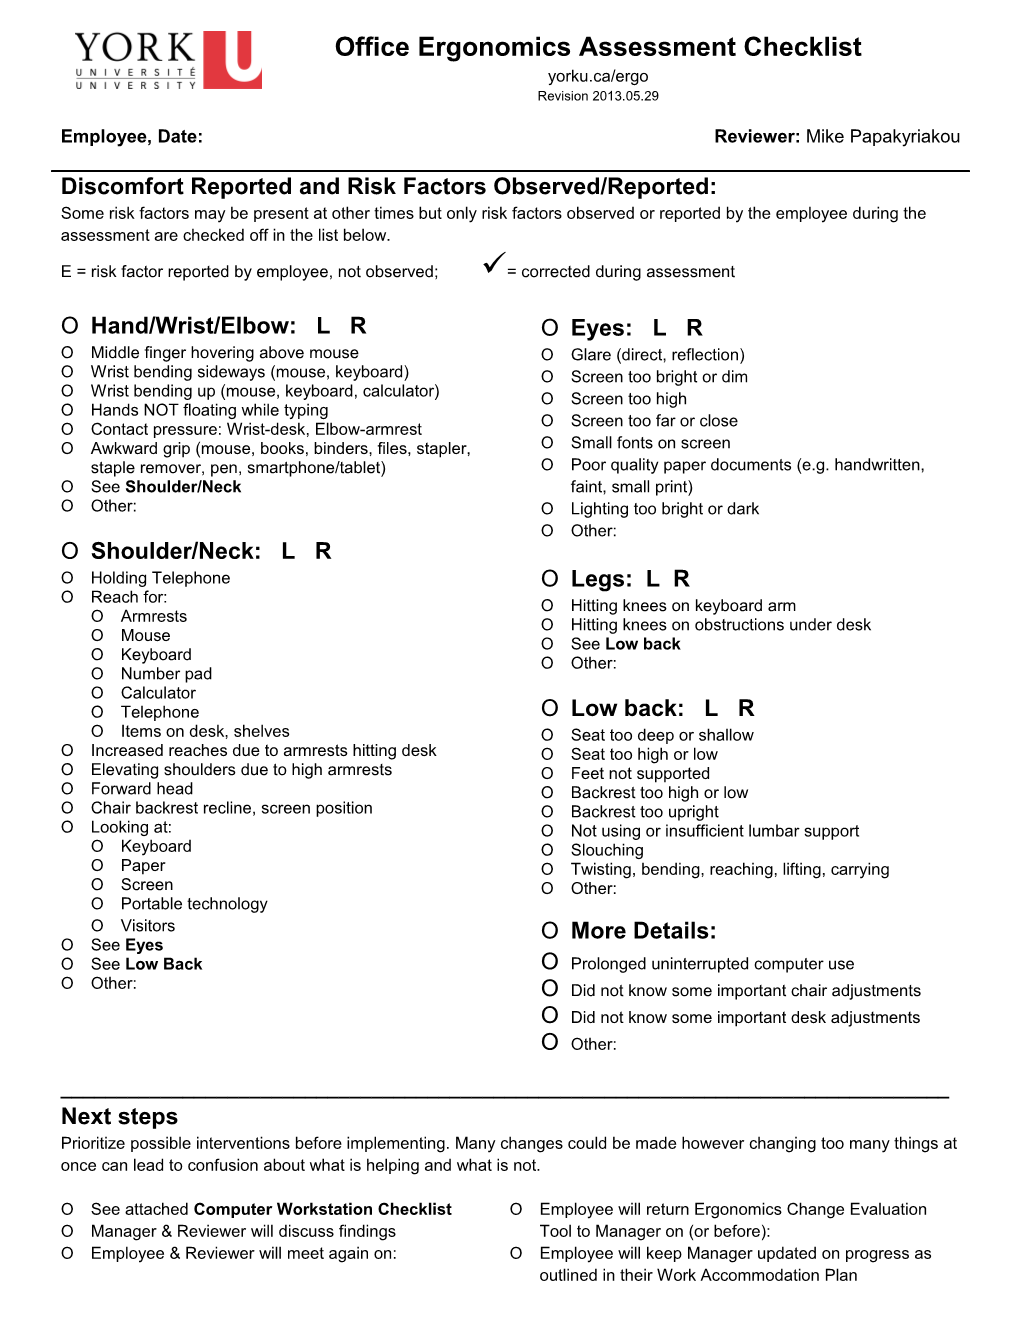 Discomfort Reported and Risk Factors Observed/Reported